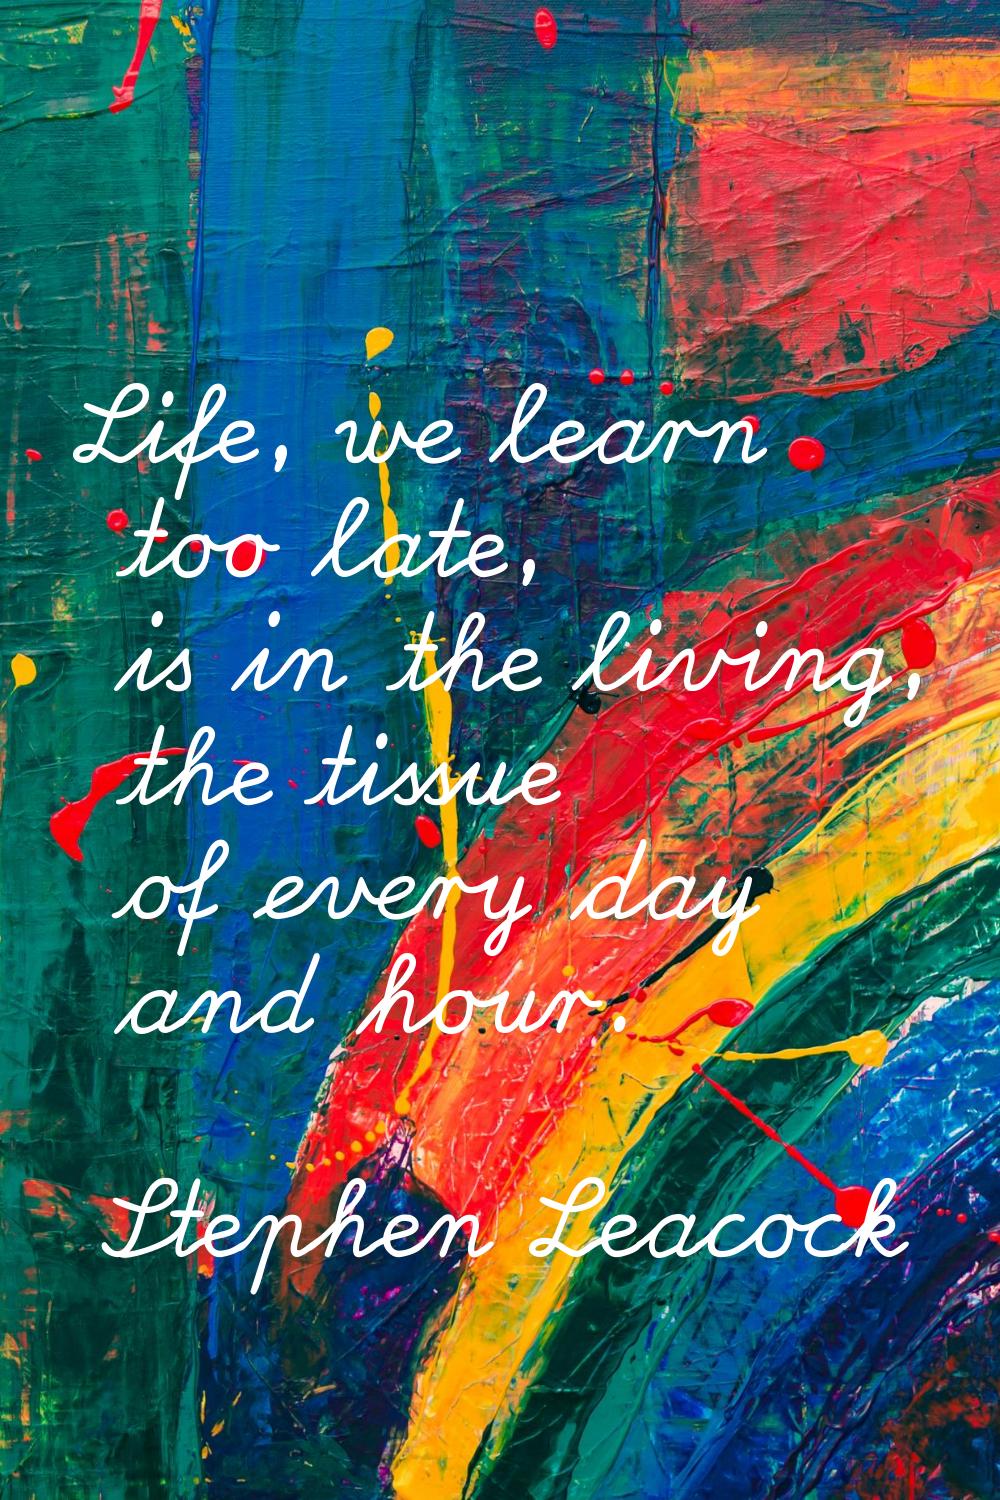 Life, we learn too late, is in the living, the tissue of every day and hour.